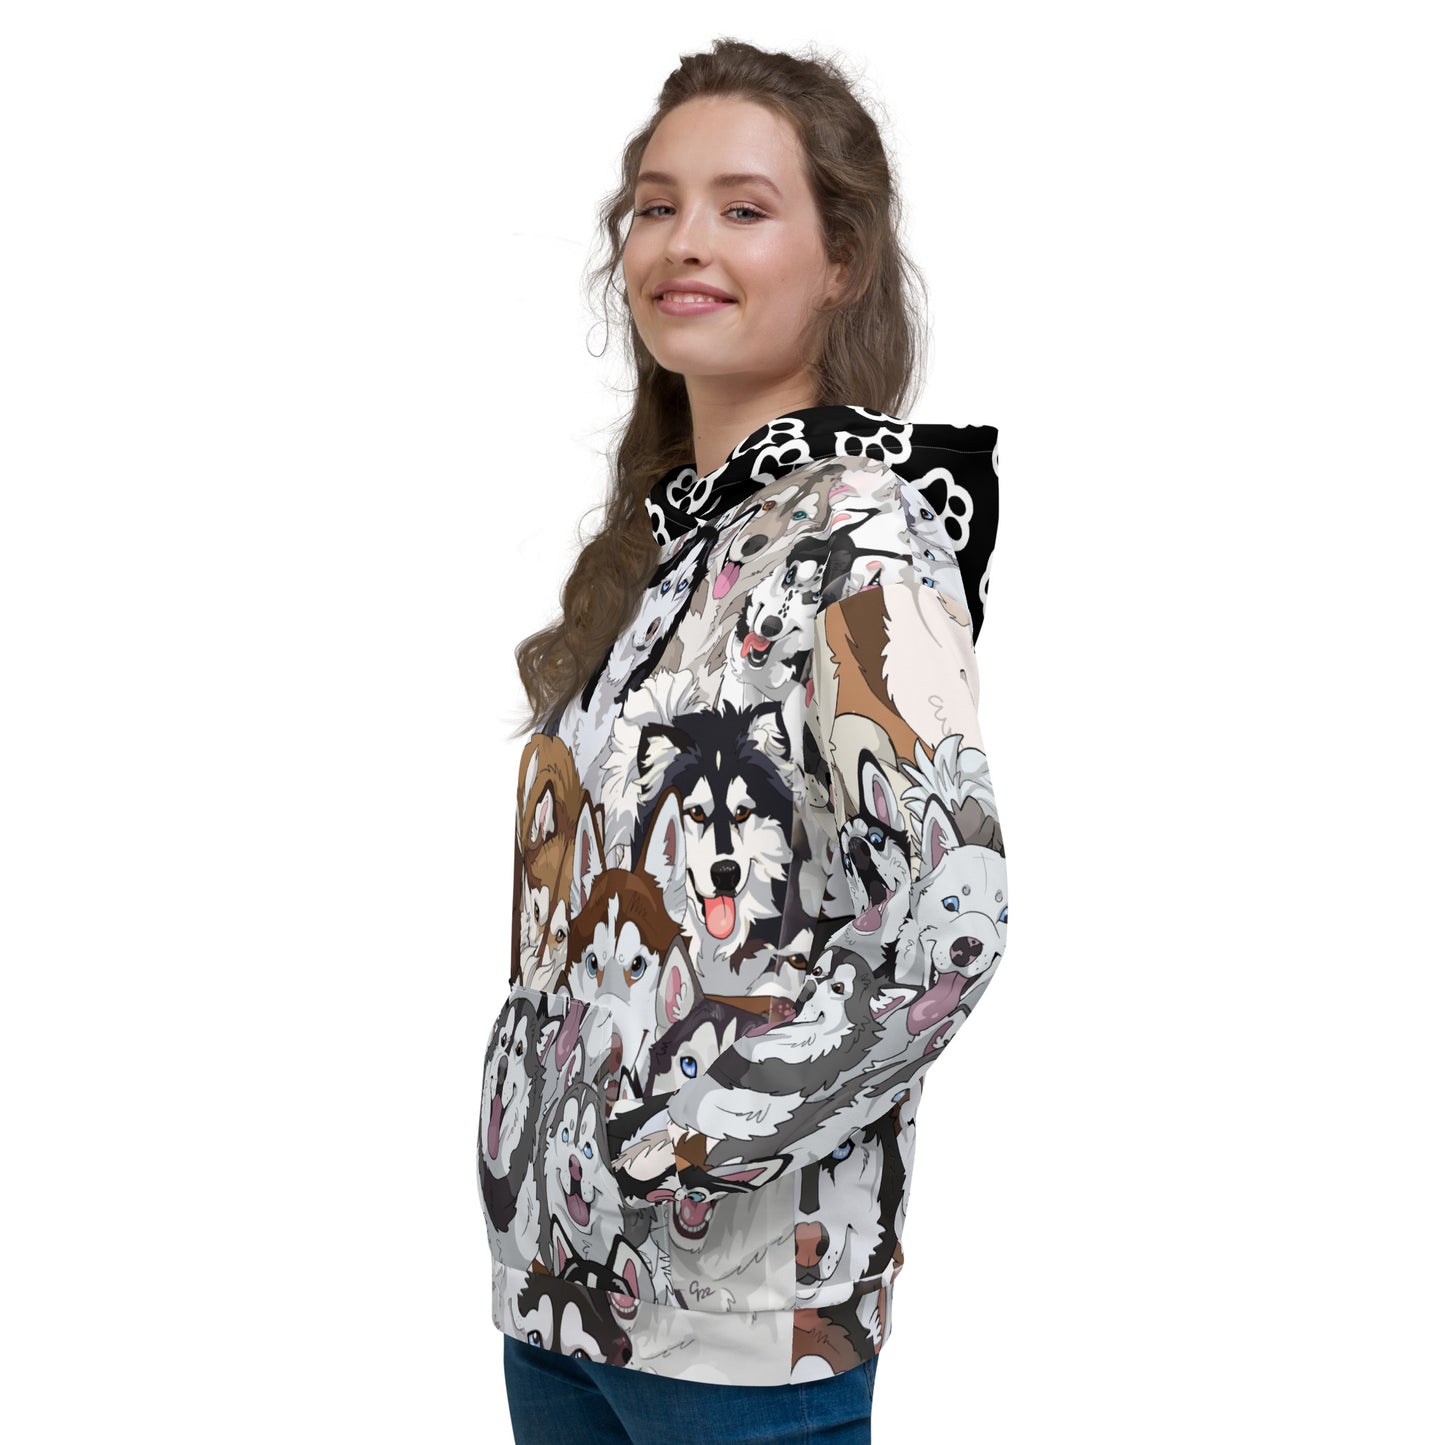 Cartoon Snow Dogs hoodie with pocket || Cameo Anderson